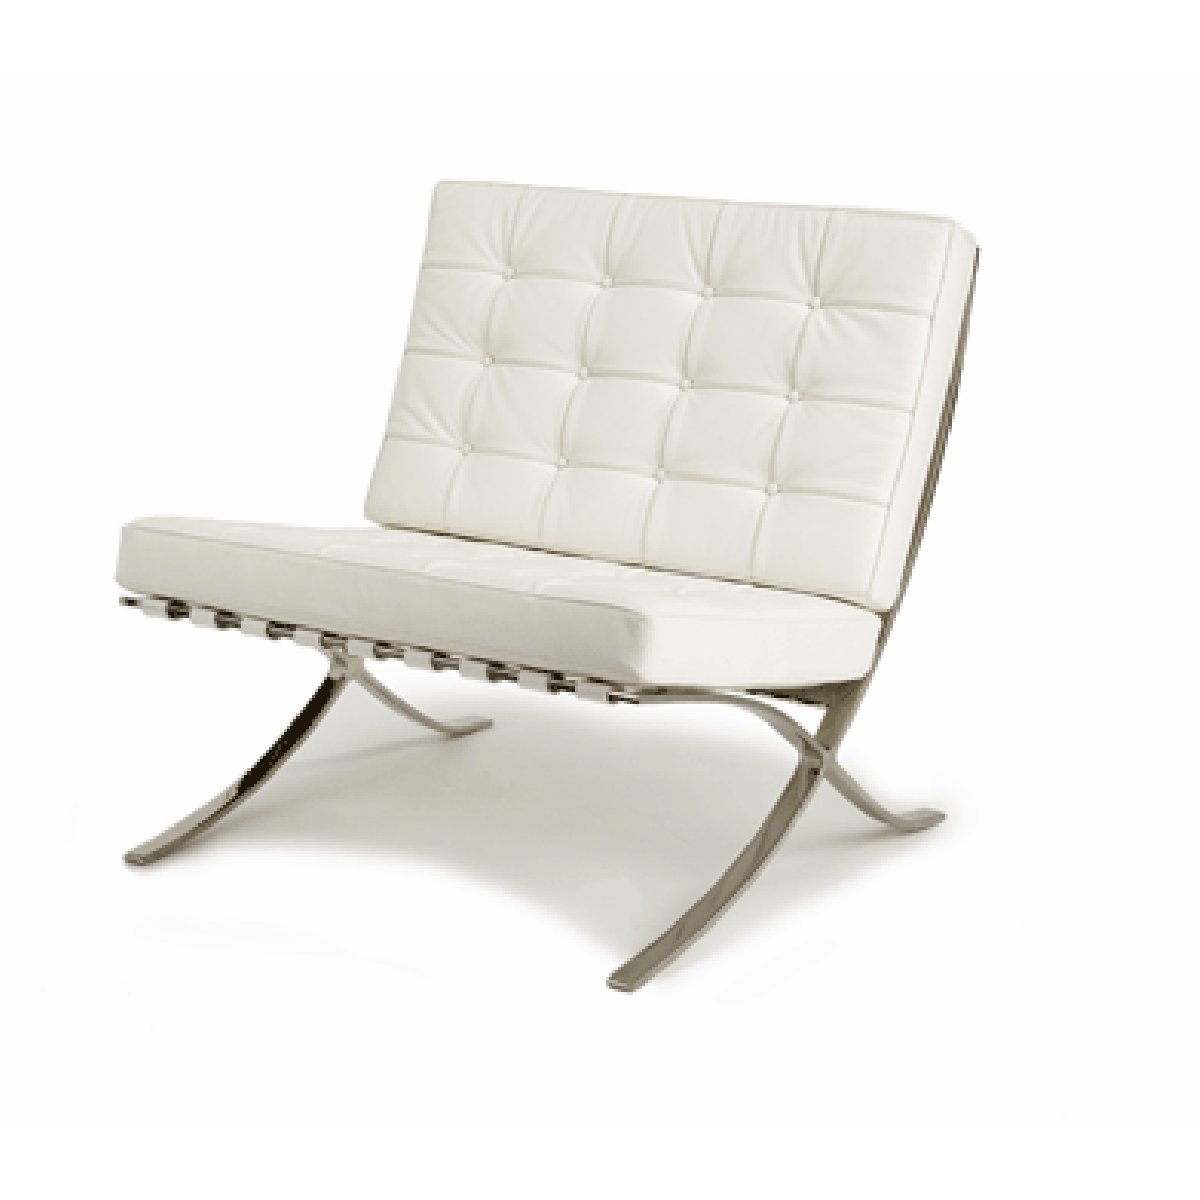 Stainless steel frame leather mies van der rohe barcelona chair 2